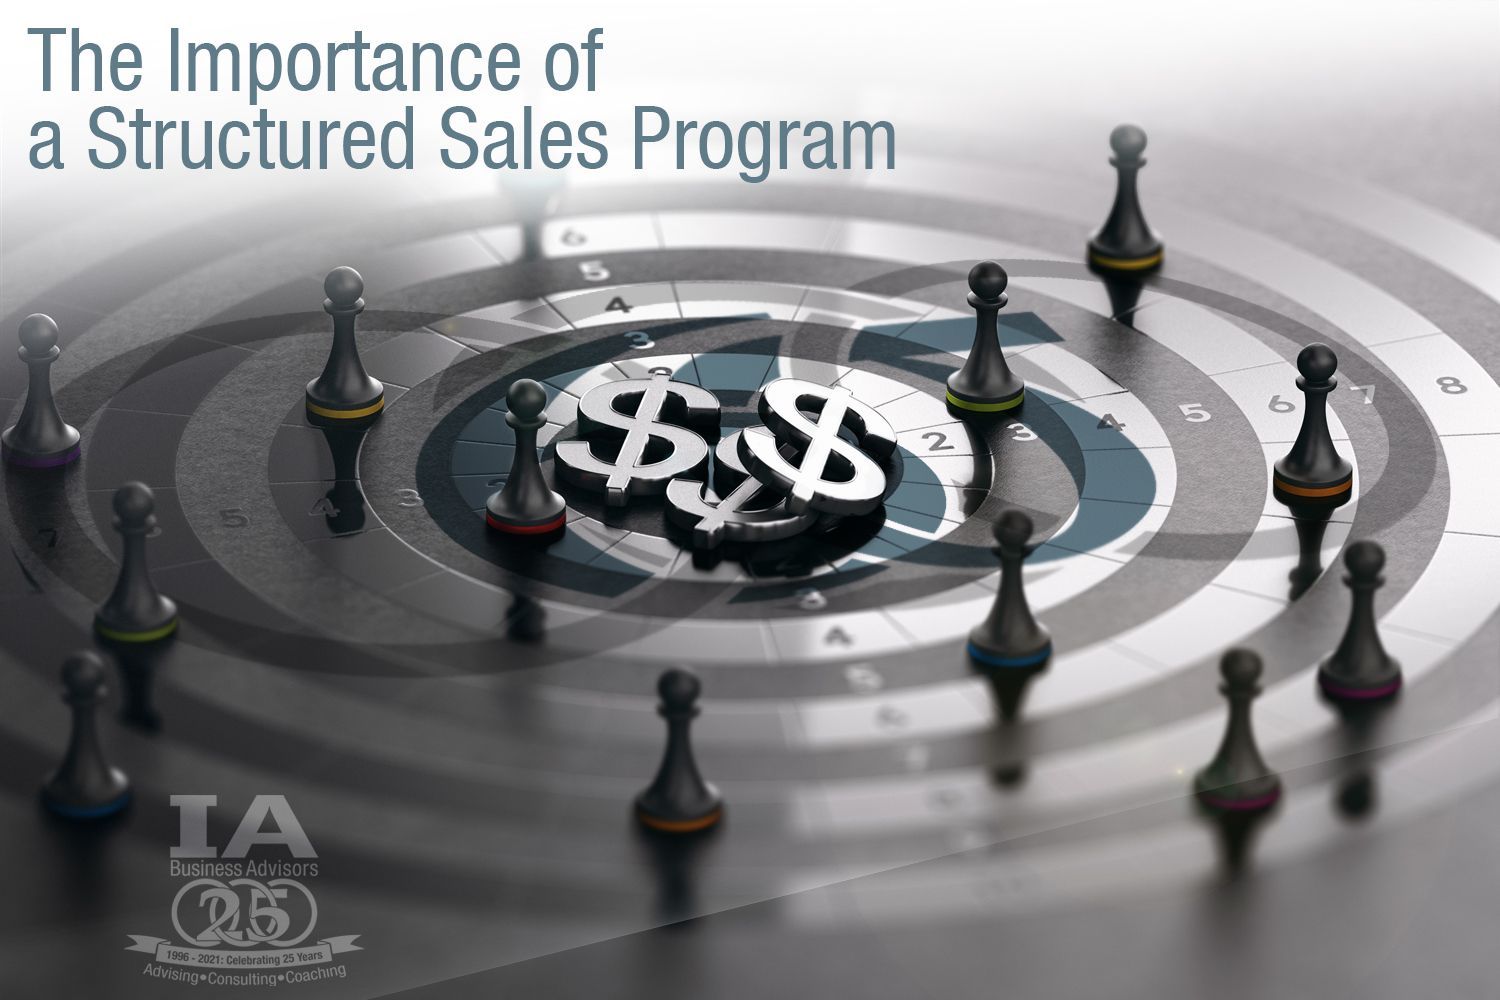 The Importance of a Structured Sales Program